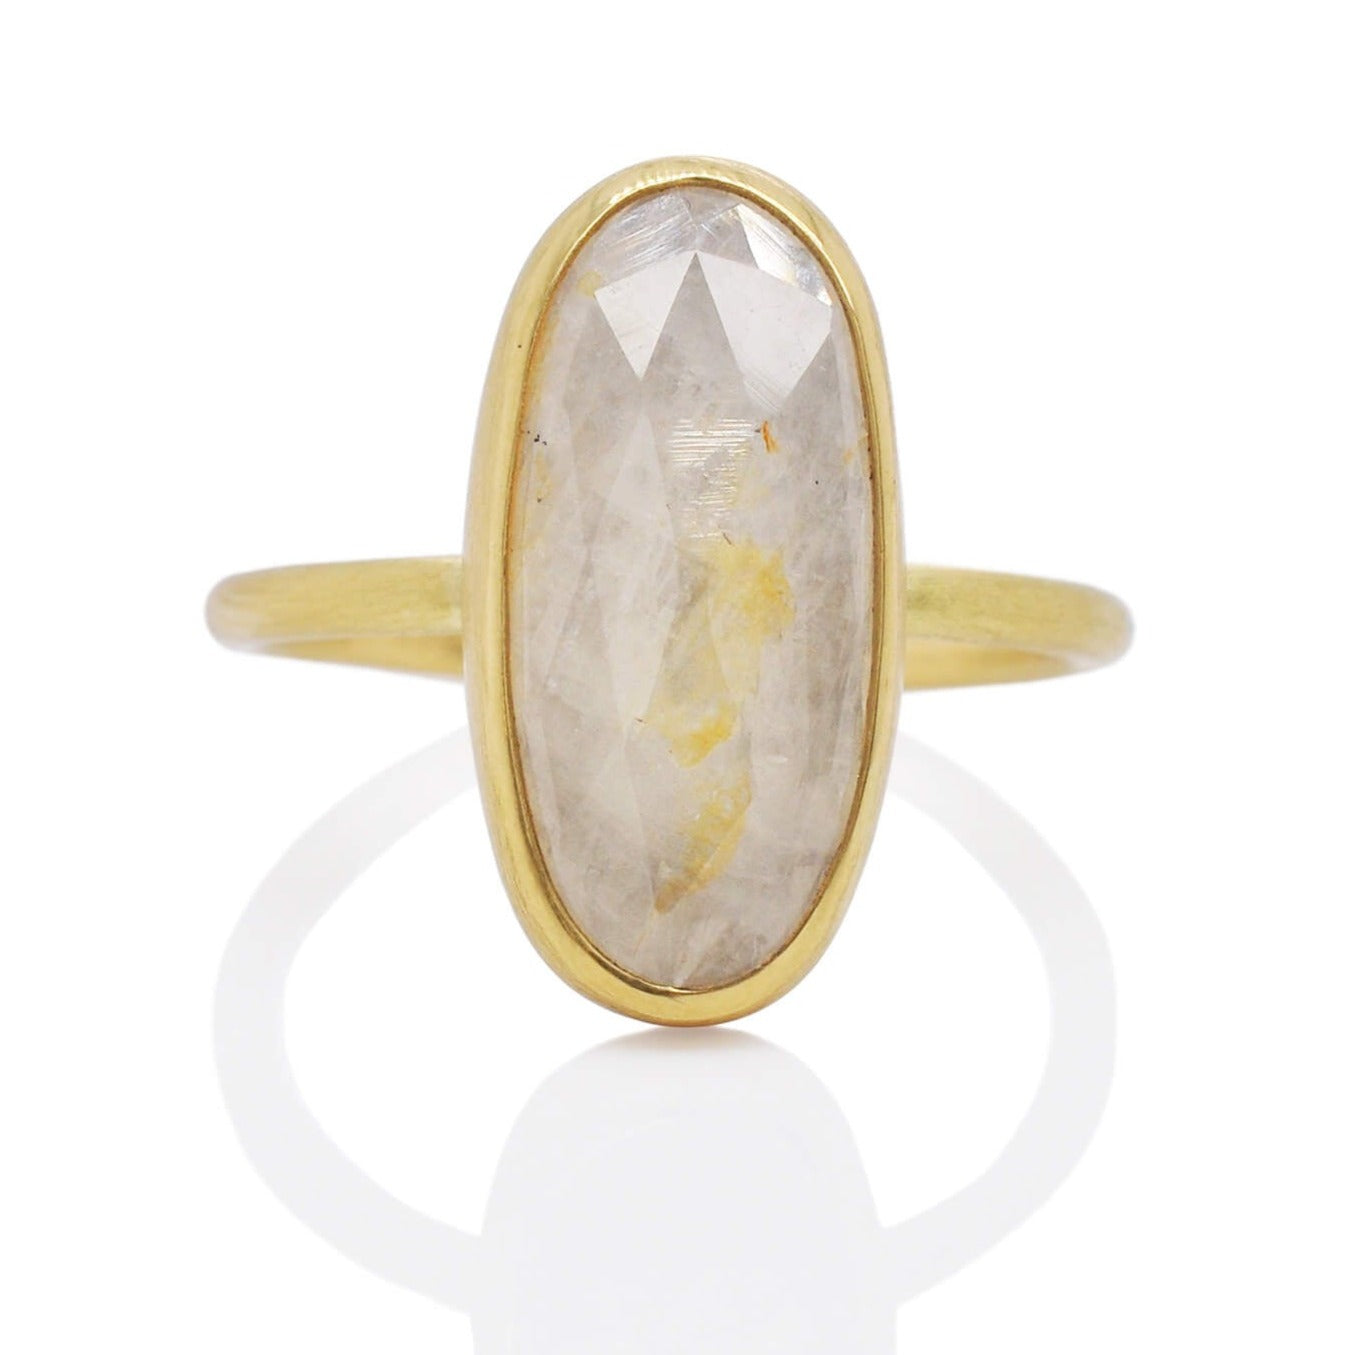 White rose cut sapphire cocktail ring in satin finished yellow gold. Handmade by EC Design Jewelry in Minneapolis, MN.